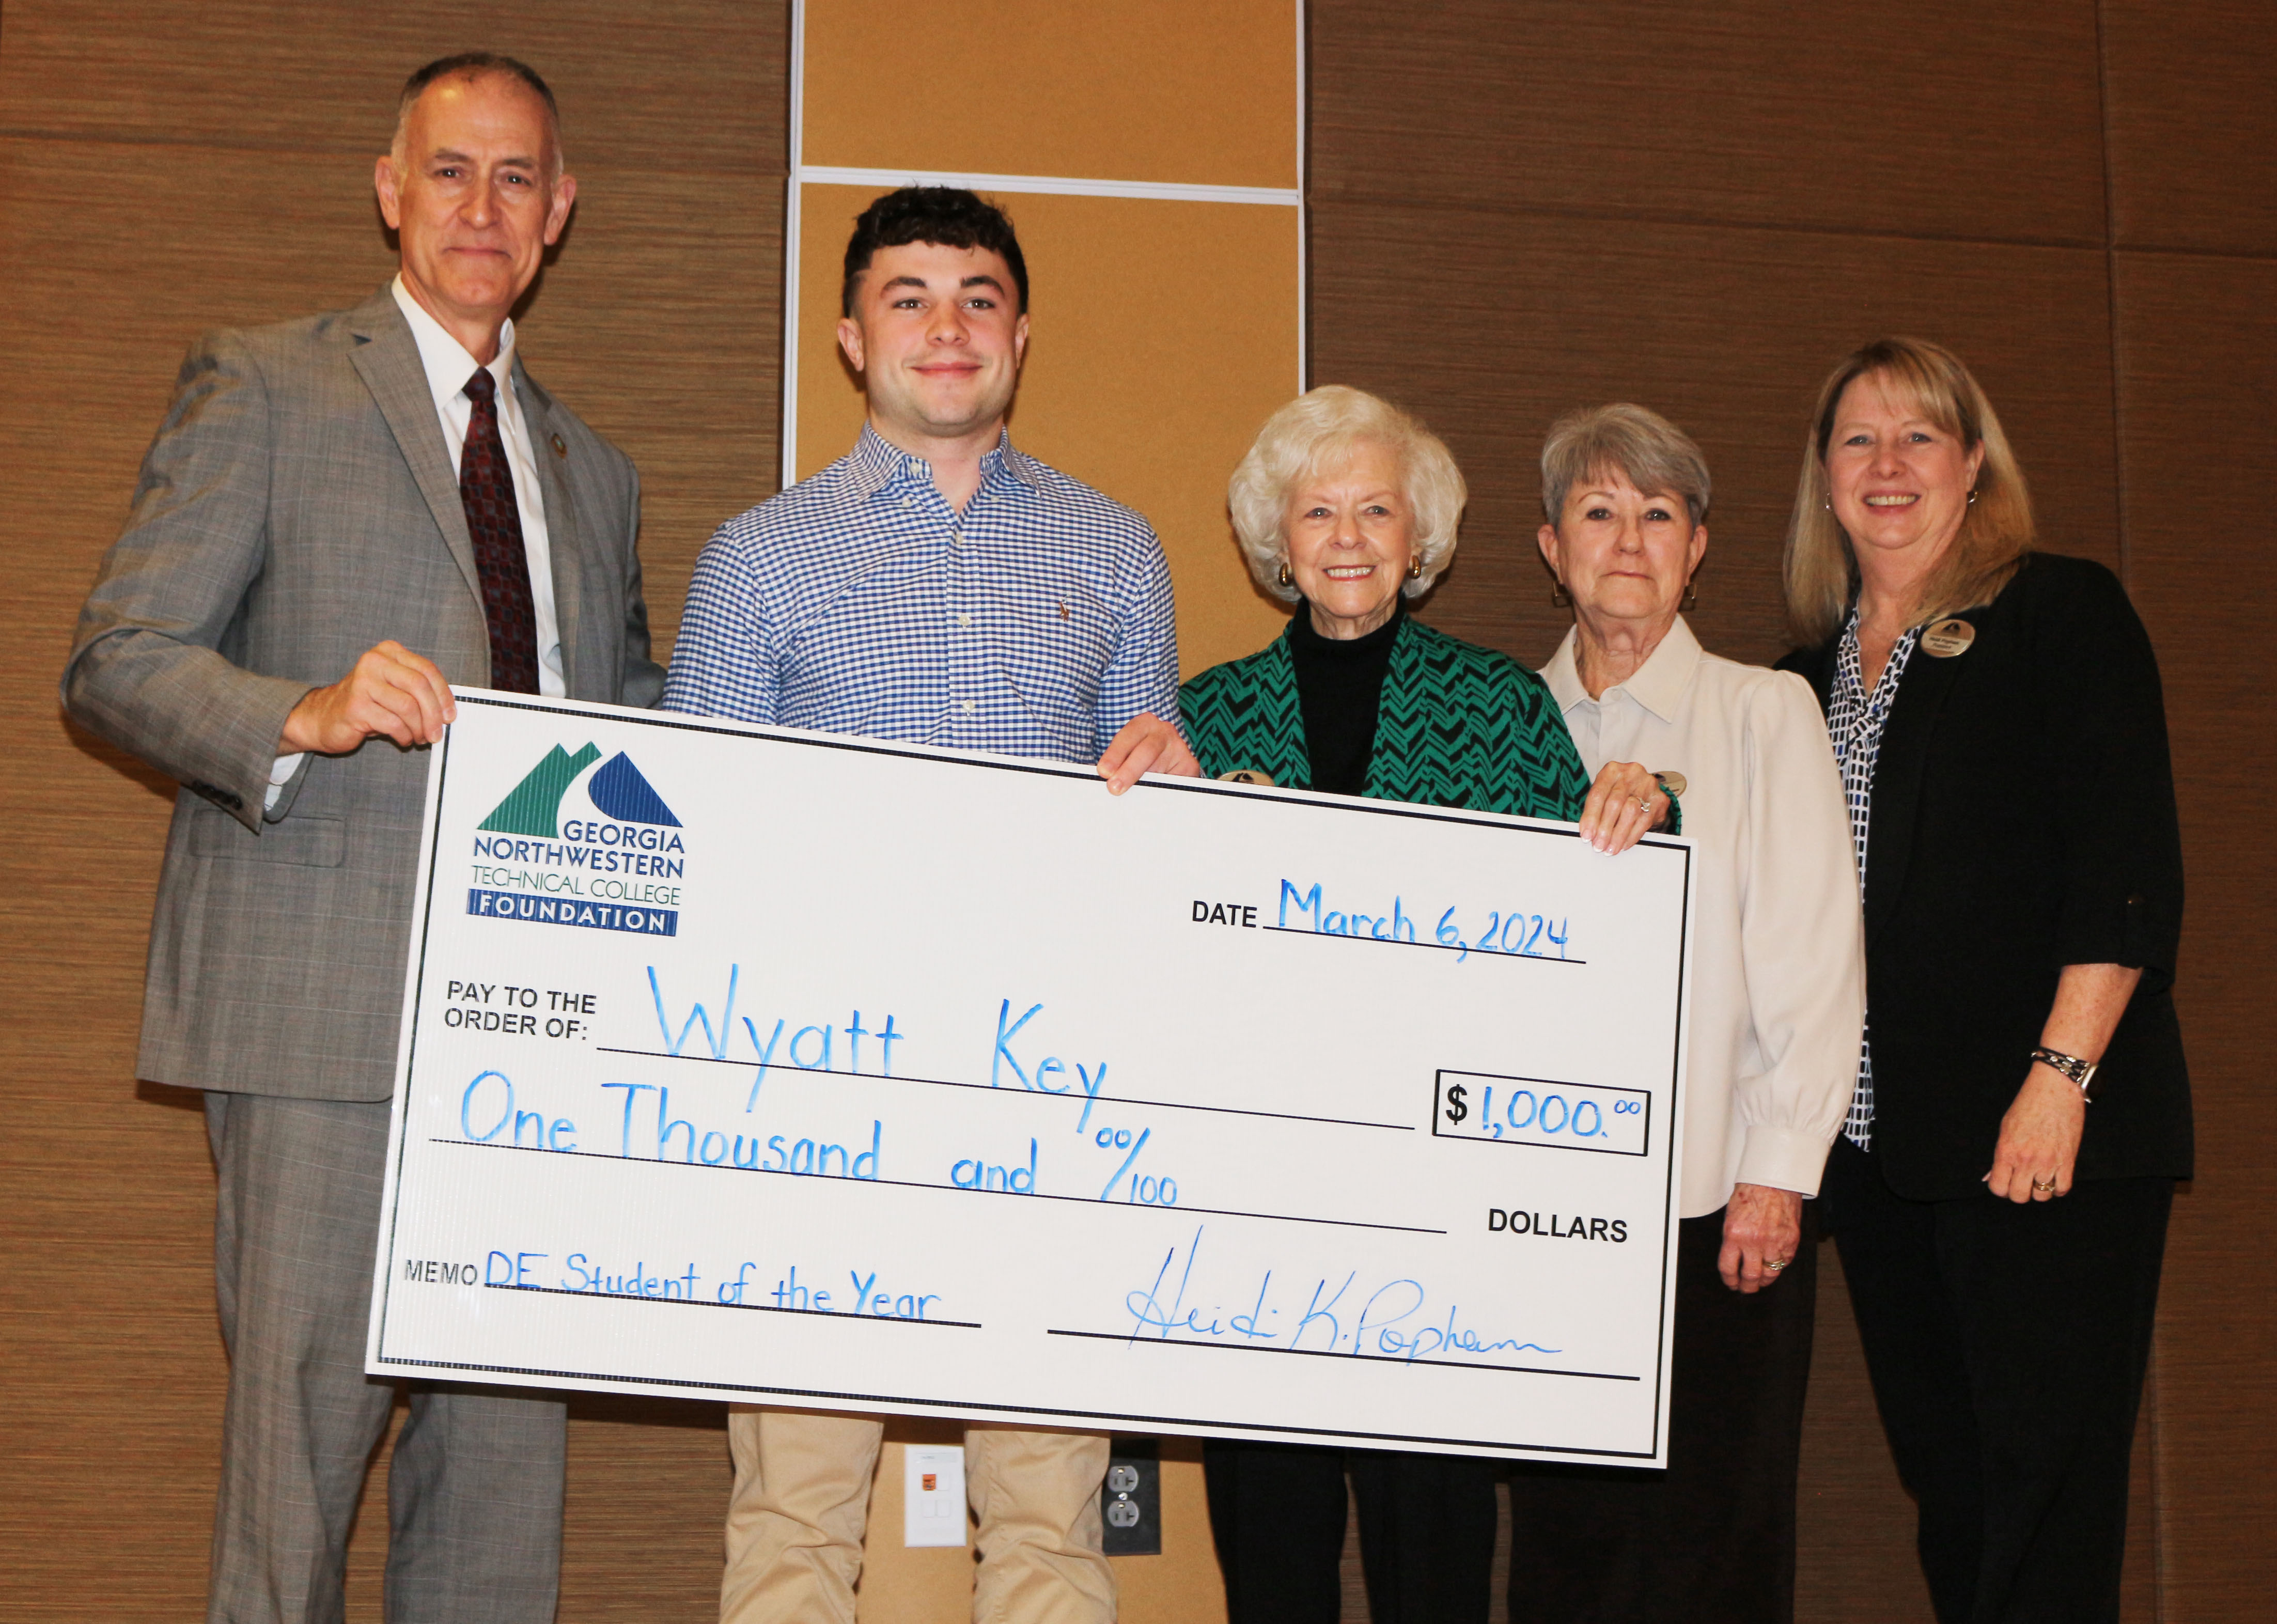 (From left) Damon Raines, Walker County Schools superintendent and GNTC Foundation Trustee; Wyatt Key; Doris White, GNTC Foundation Trustee; Linda Case, GNTC Foundation Trustee; and Dr. Heidi Popham, president of GNTC, celebrate Key’s selection as GNTC’s first Dual Enrollment Student of the Year and recipient of a $1,000 scholarship.